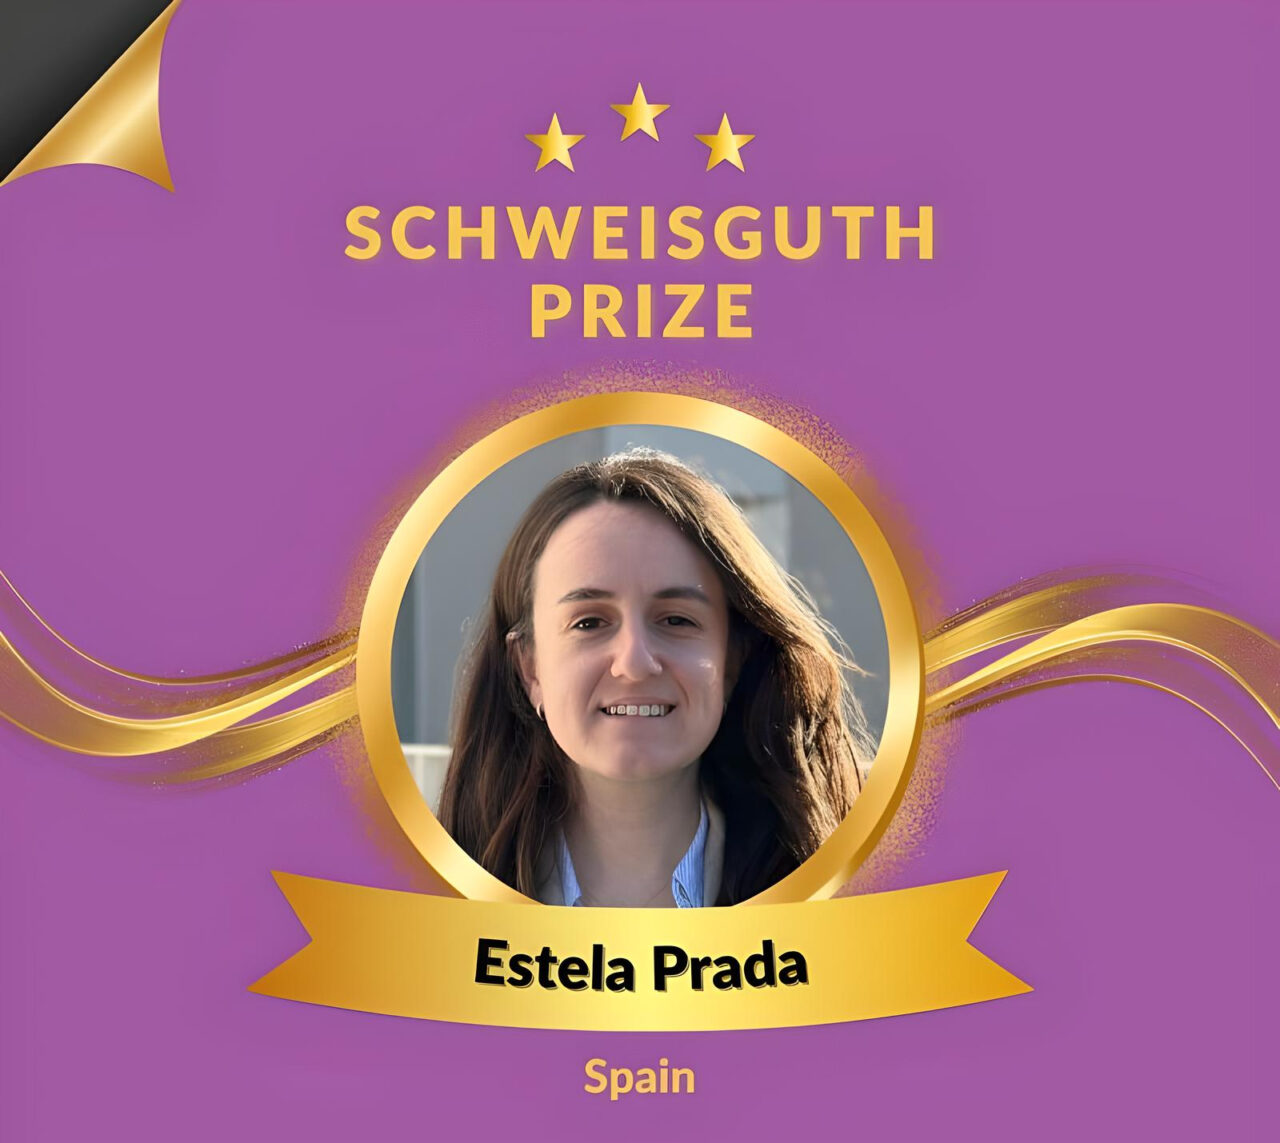 SIOP – Estela Prada has been awarded with The Schweisguth Prize